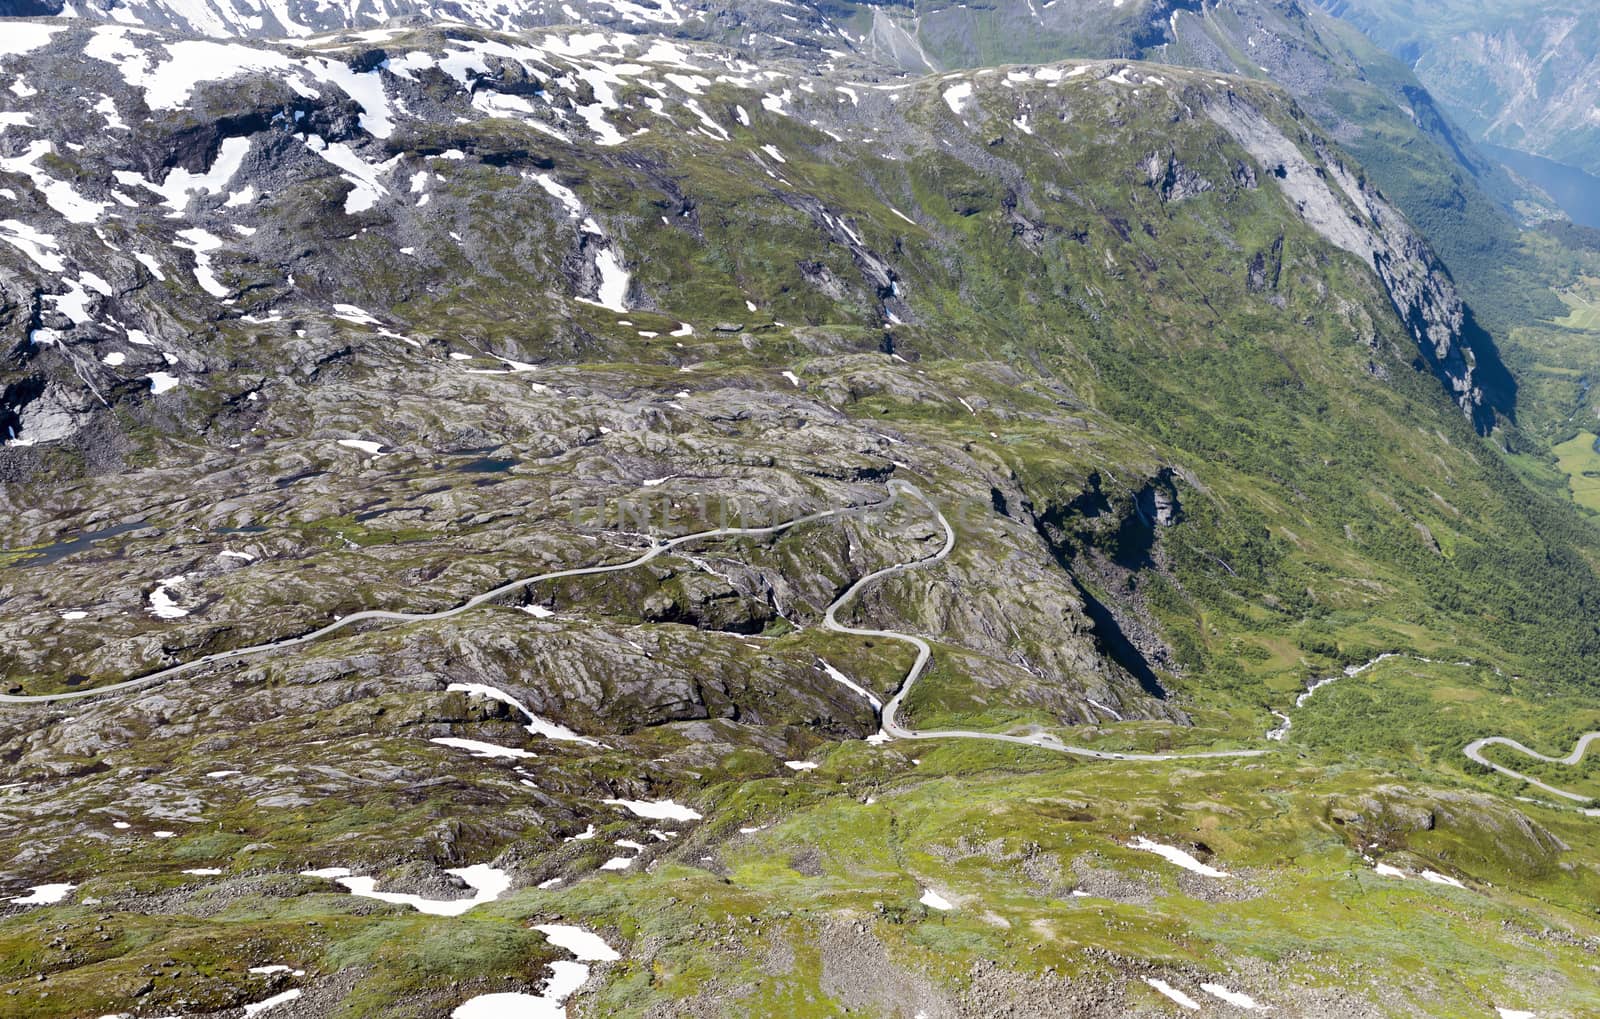 the dalsnibba or road 63 touristic road to the high view of the geirangerfjord in norway